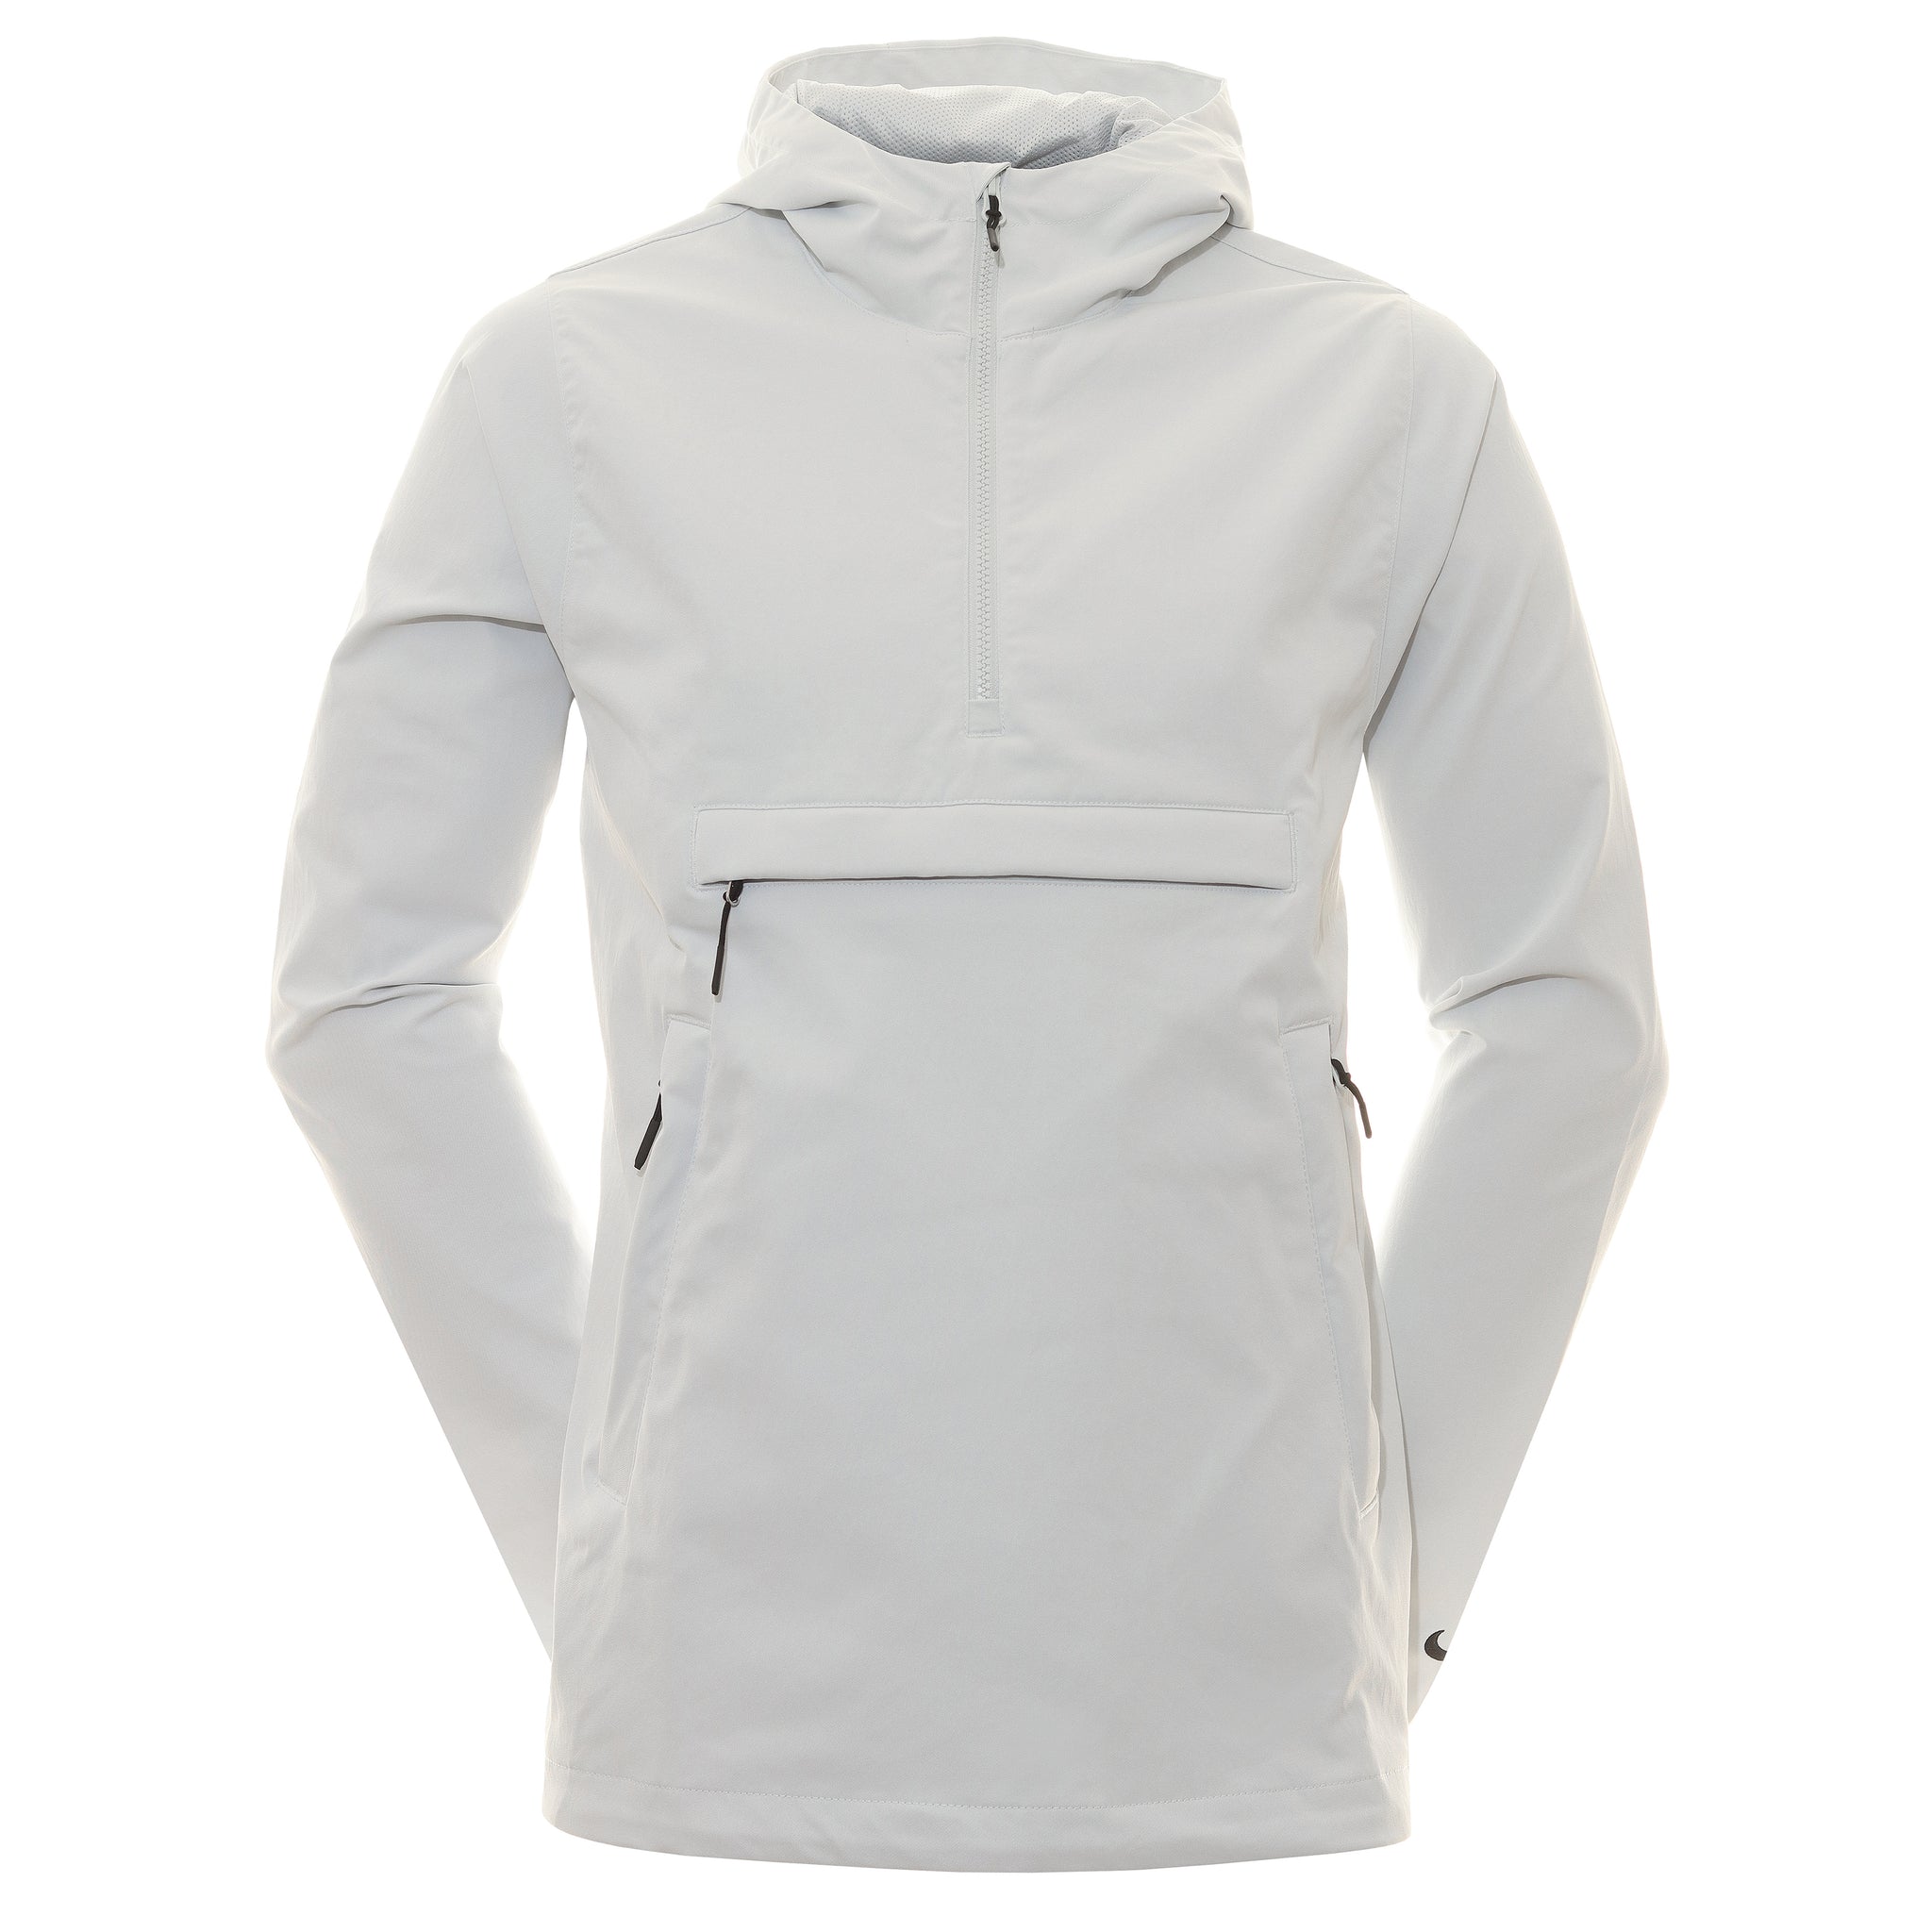 Nike Golf Unscripted Repel 1/2 Zip Jacket